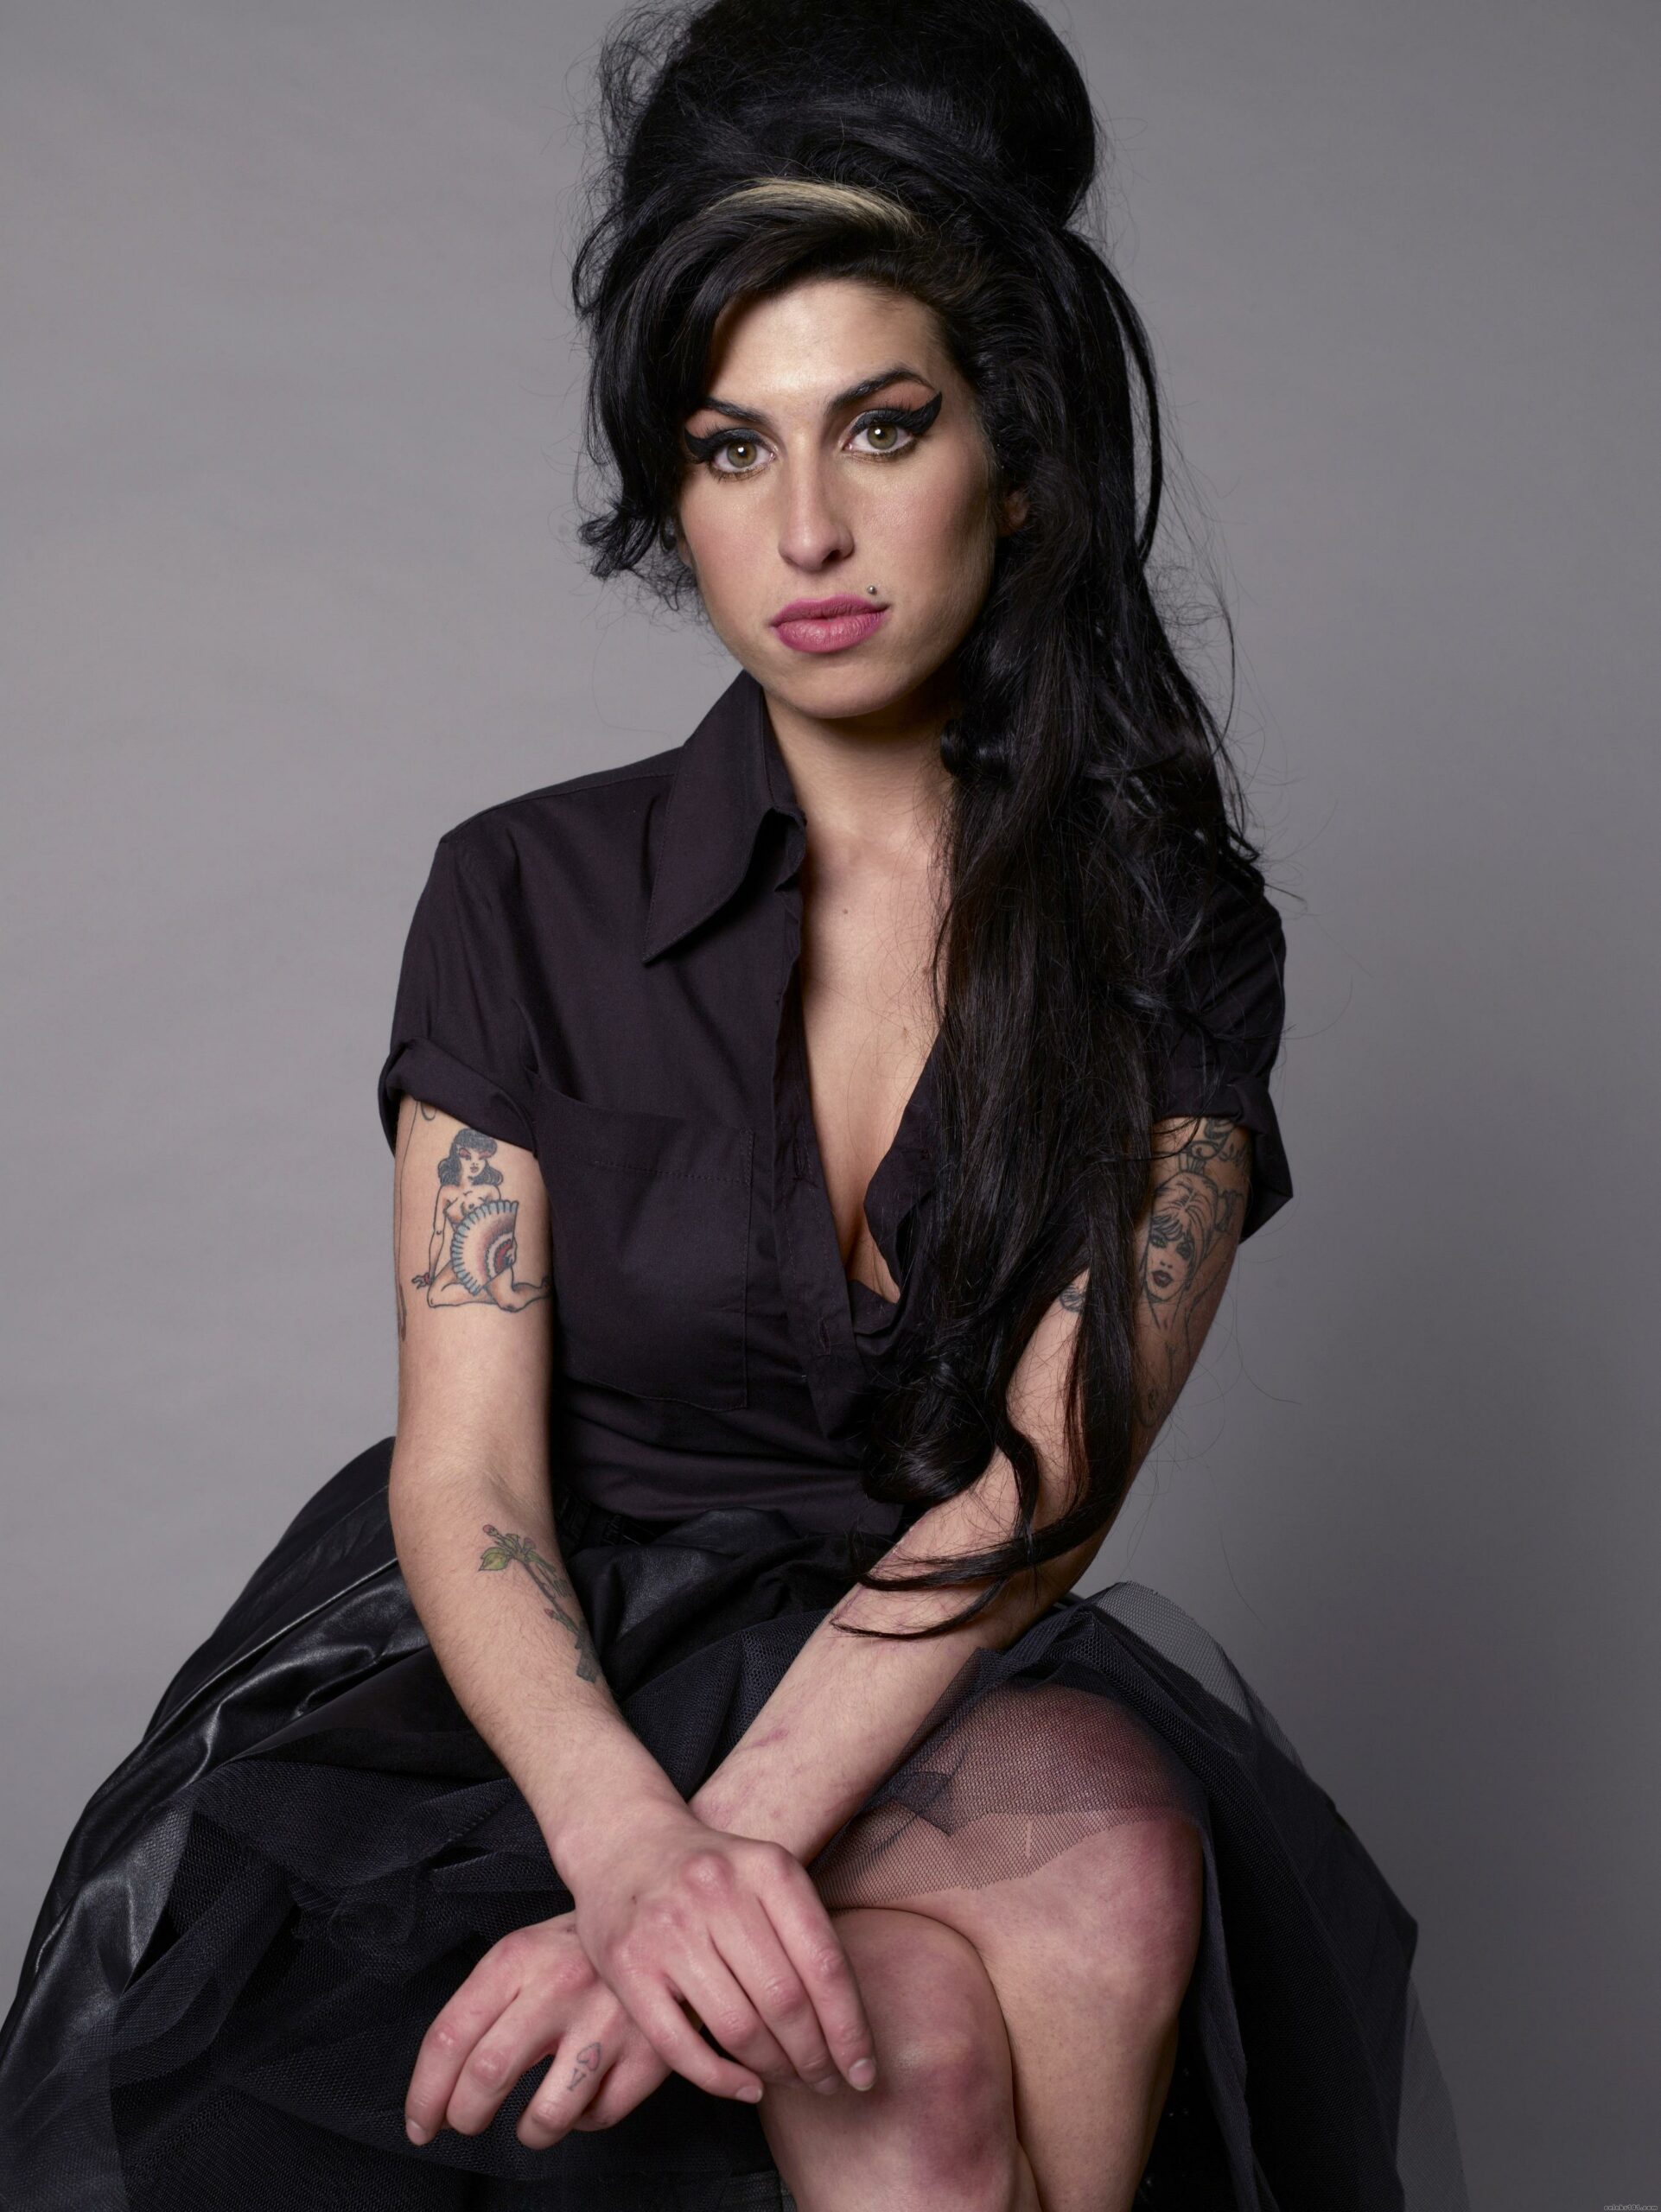 Inside The World Of Amy Winehouse: A Deep Dive Into Her Music And Troubled Past